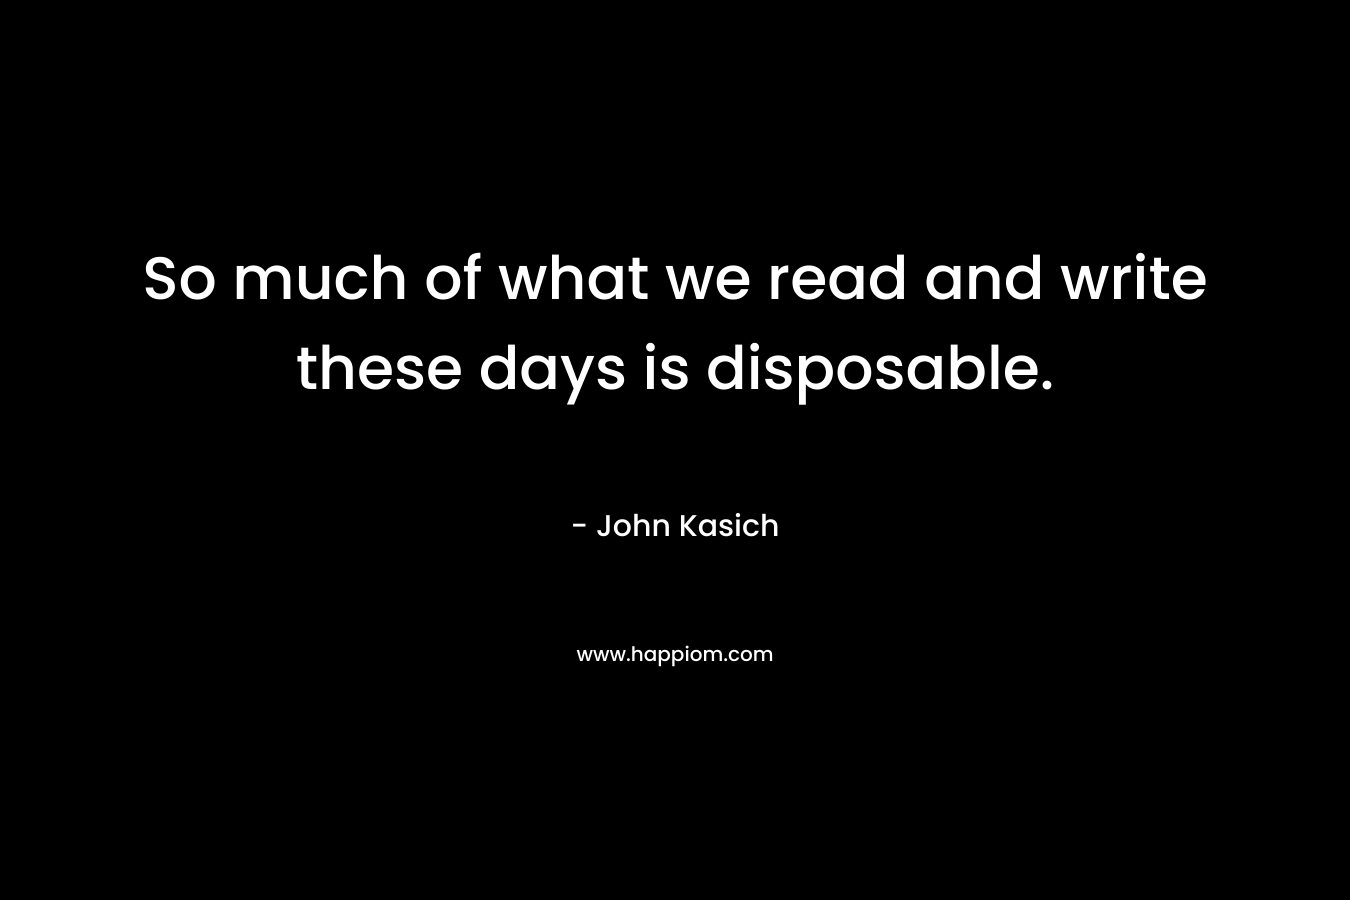 So much of what we read and write these days is disposable.